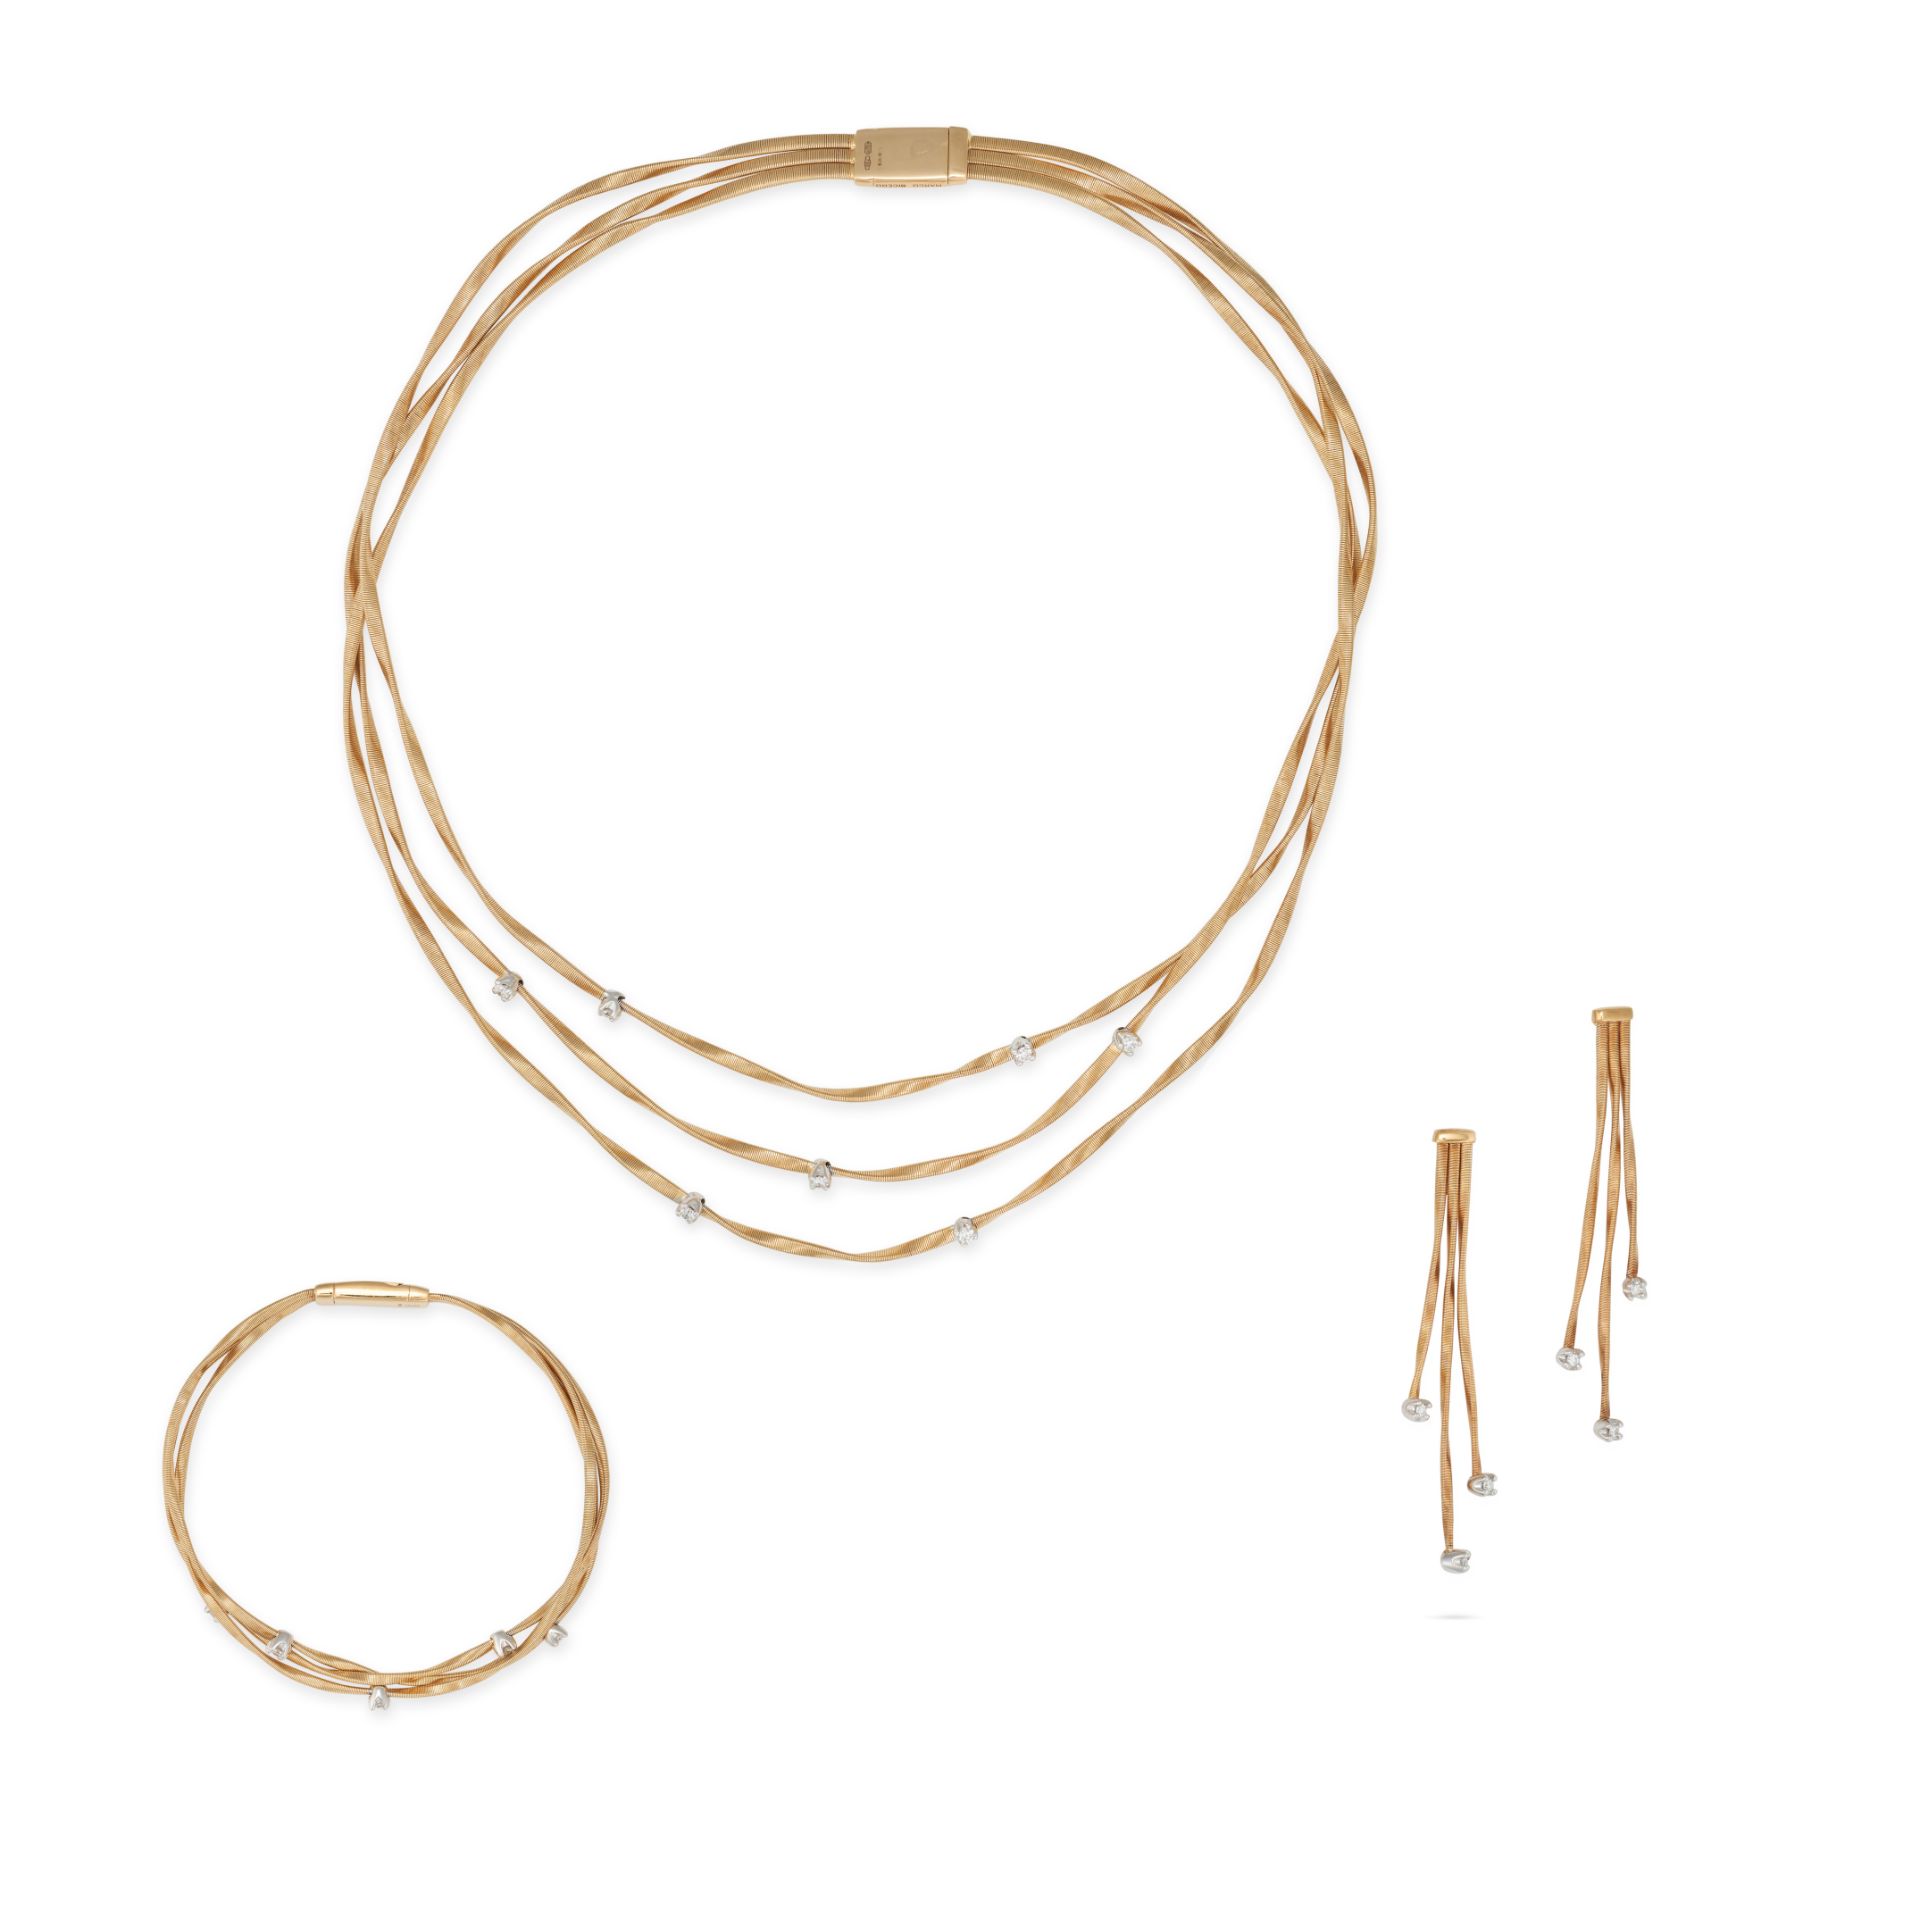 MARCO BICEGO, A DIAMOND MARRAKESH NECKLACE, EARRINGS AND BRACELET SUITE in 18ct yellow gold, the ...